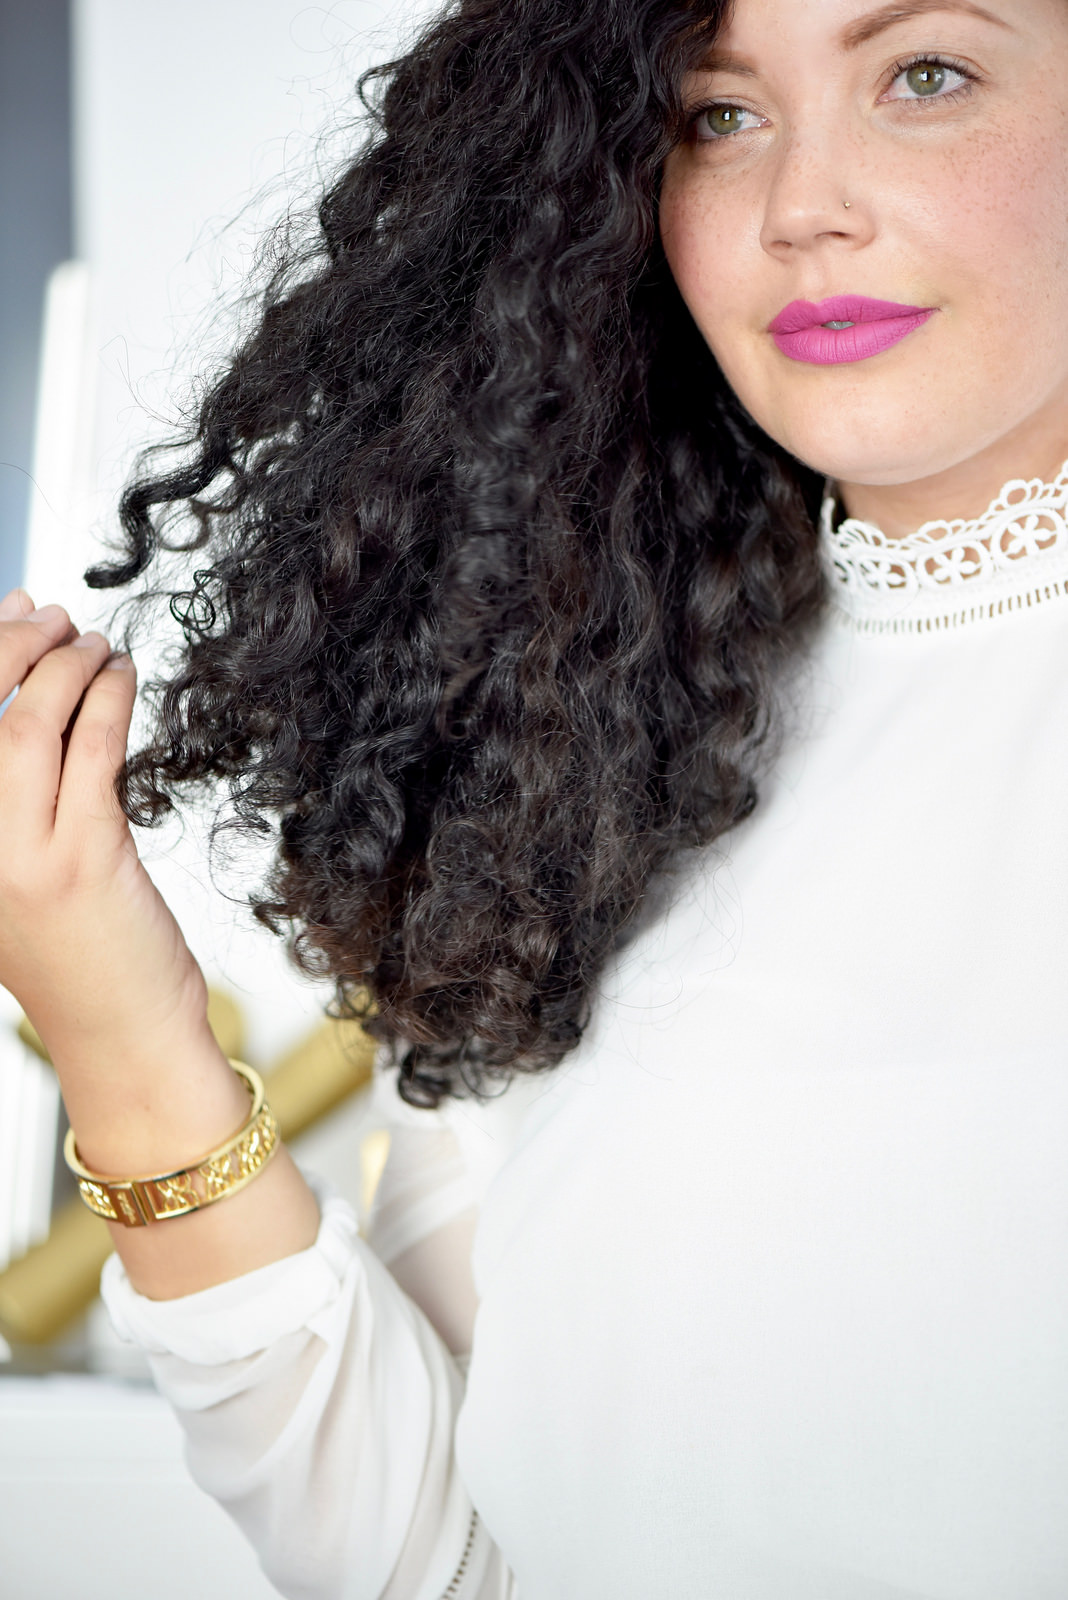 Girl With Curves blogger Tanesha Awasthi shares her curly hair routine.